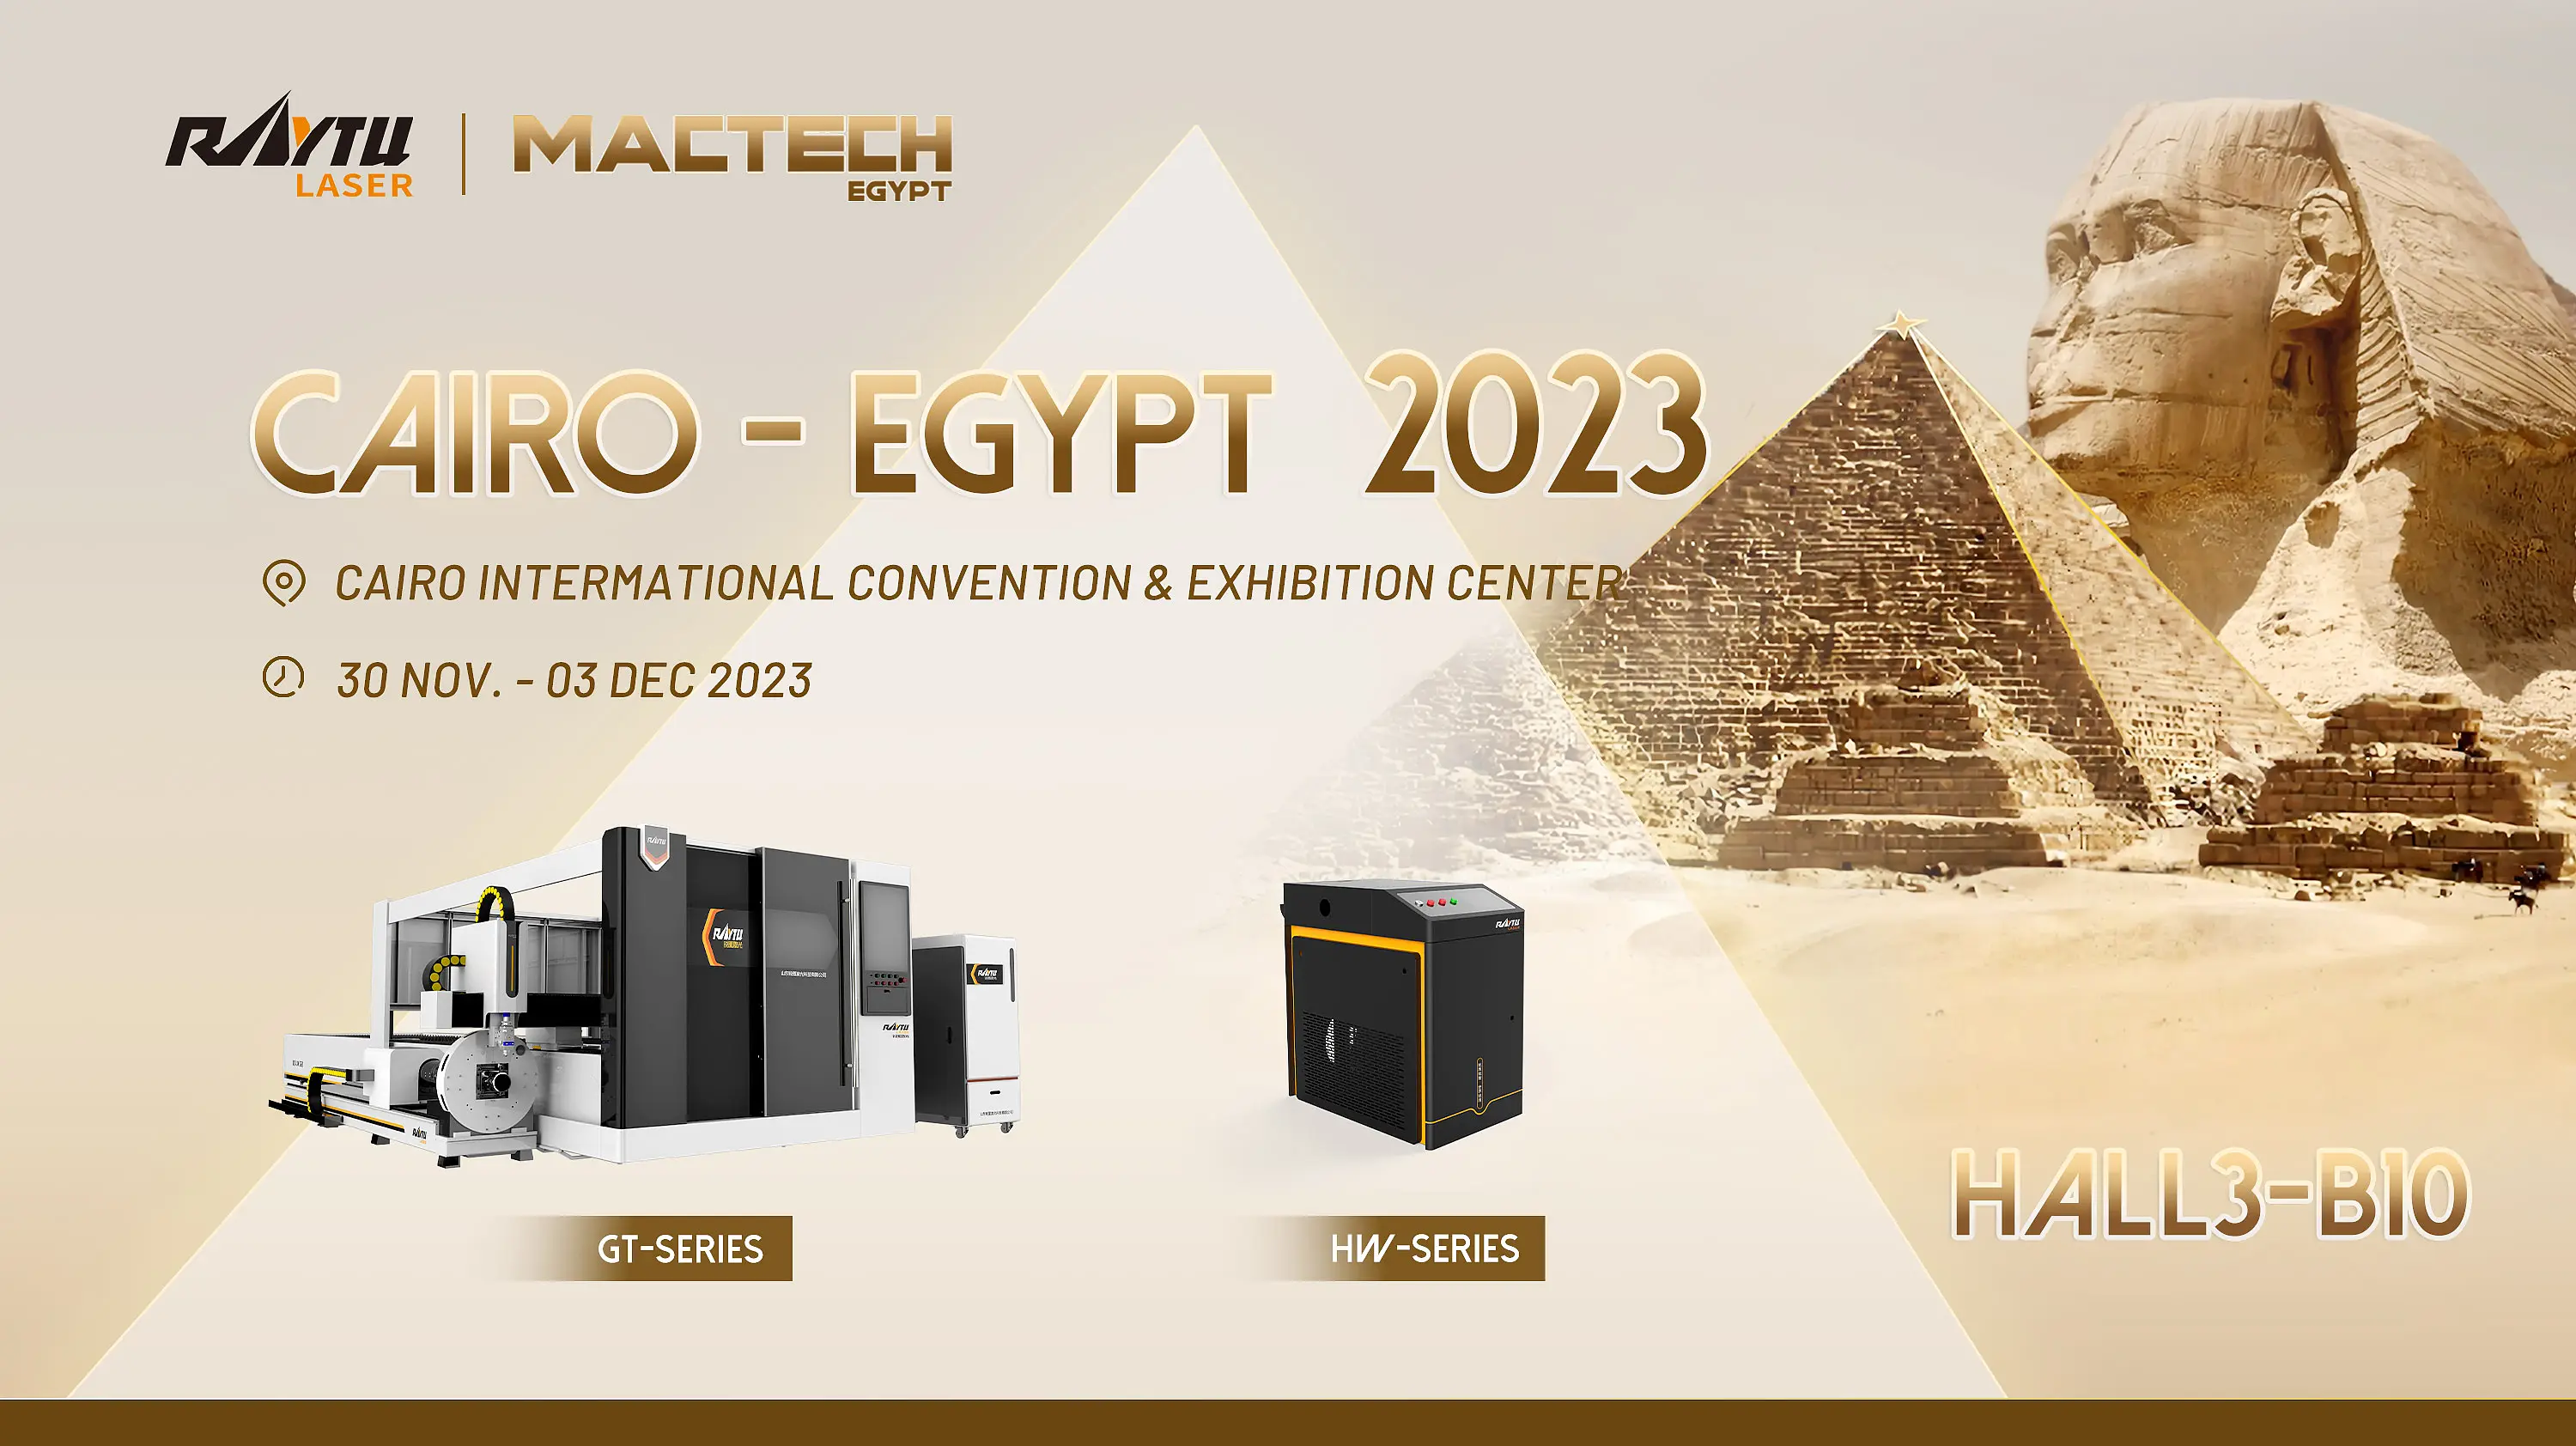 Raytu laser invite you to visit us at Mactech Cairo-Egypt 2023 from 30th NOV to 3 DEC 2023.